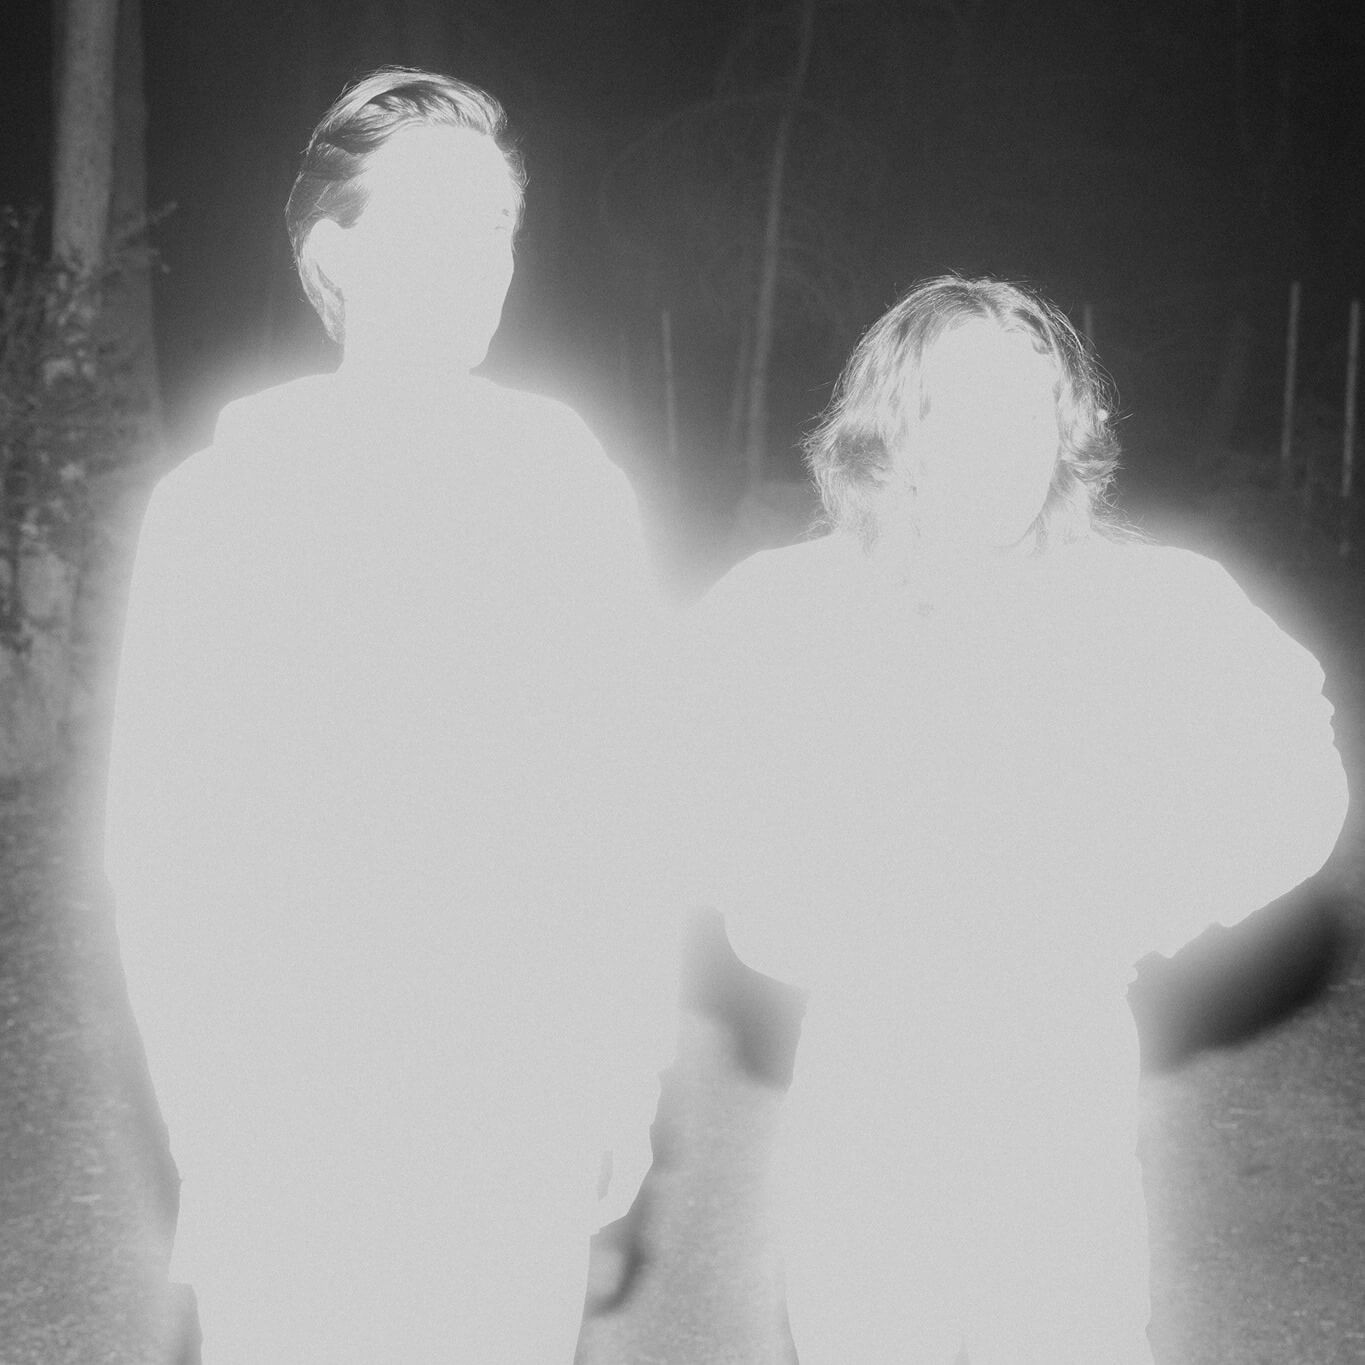 Purity Ring has released a new video for Womb album track “sinew.” The duo has also announced new 2021 tour days